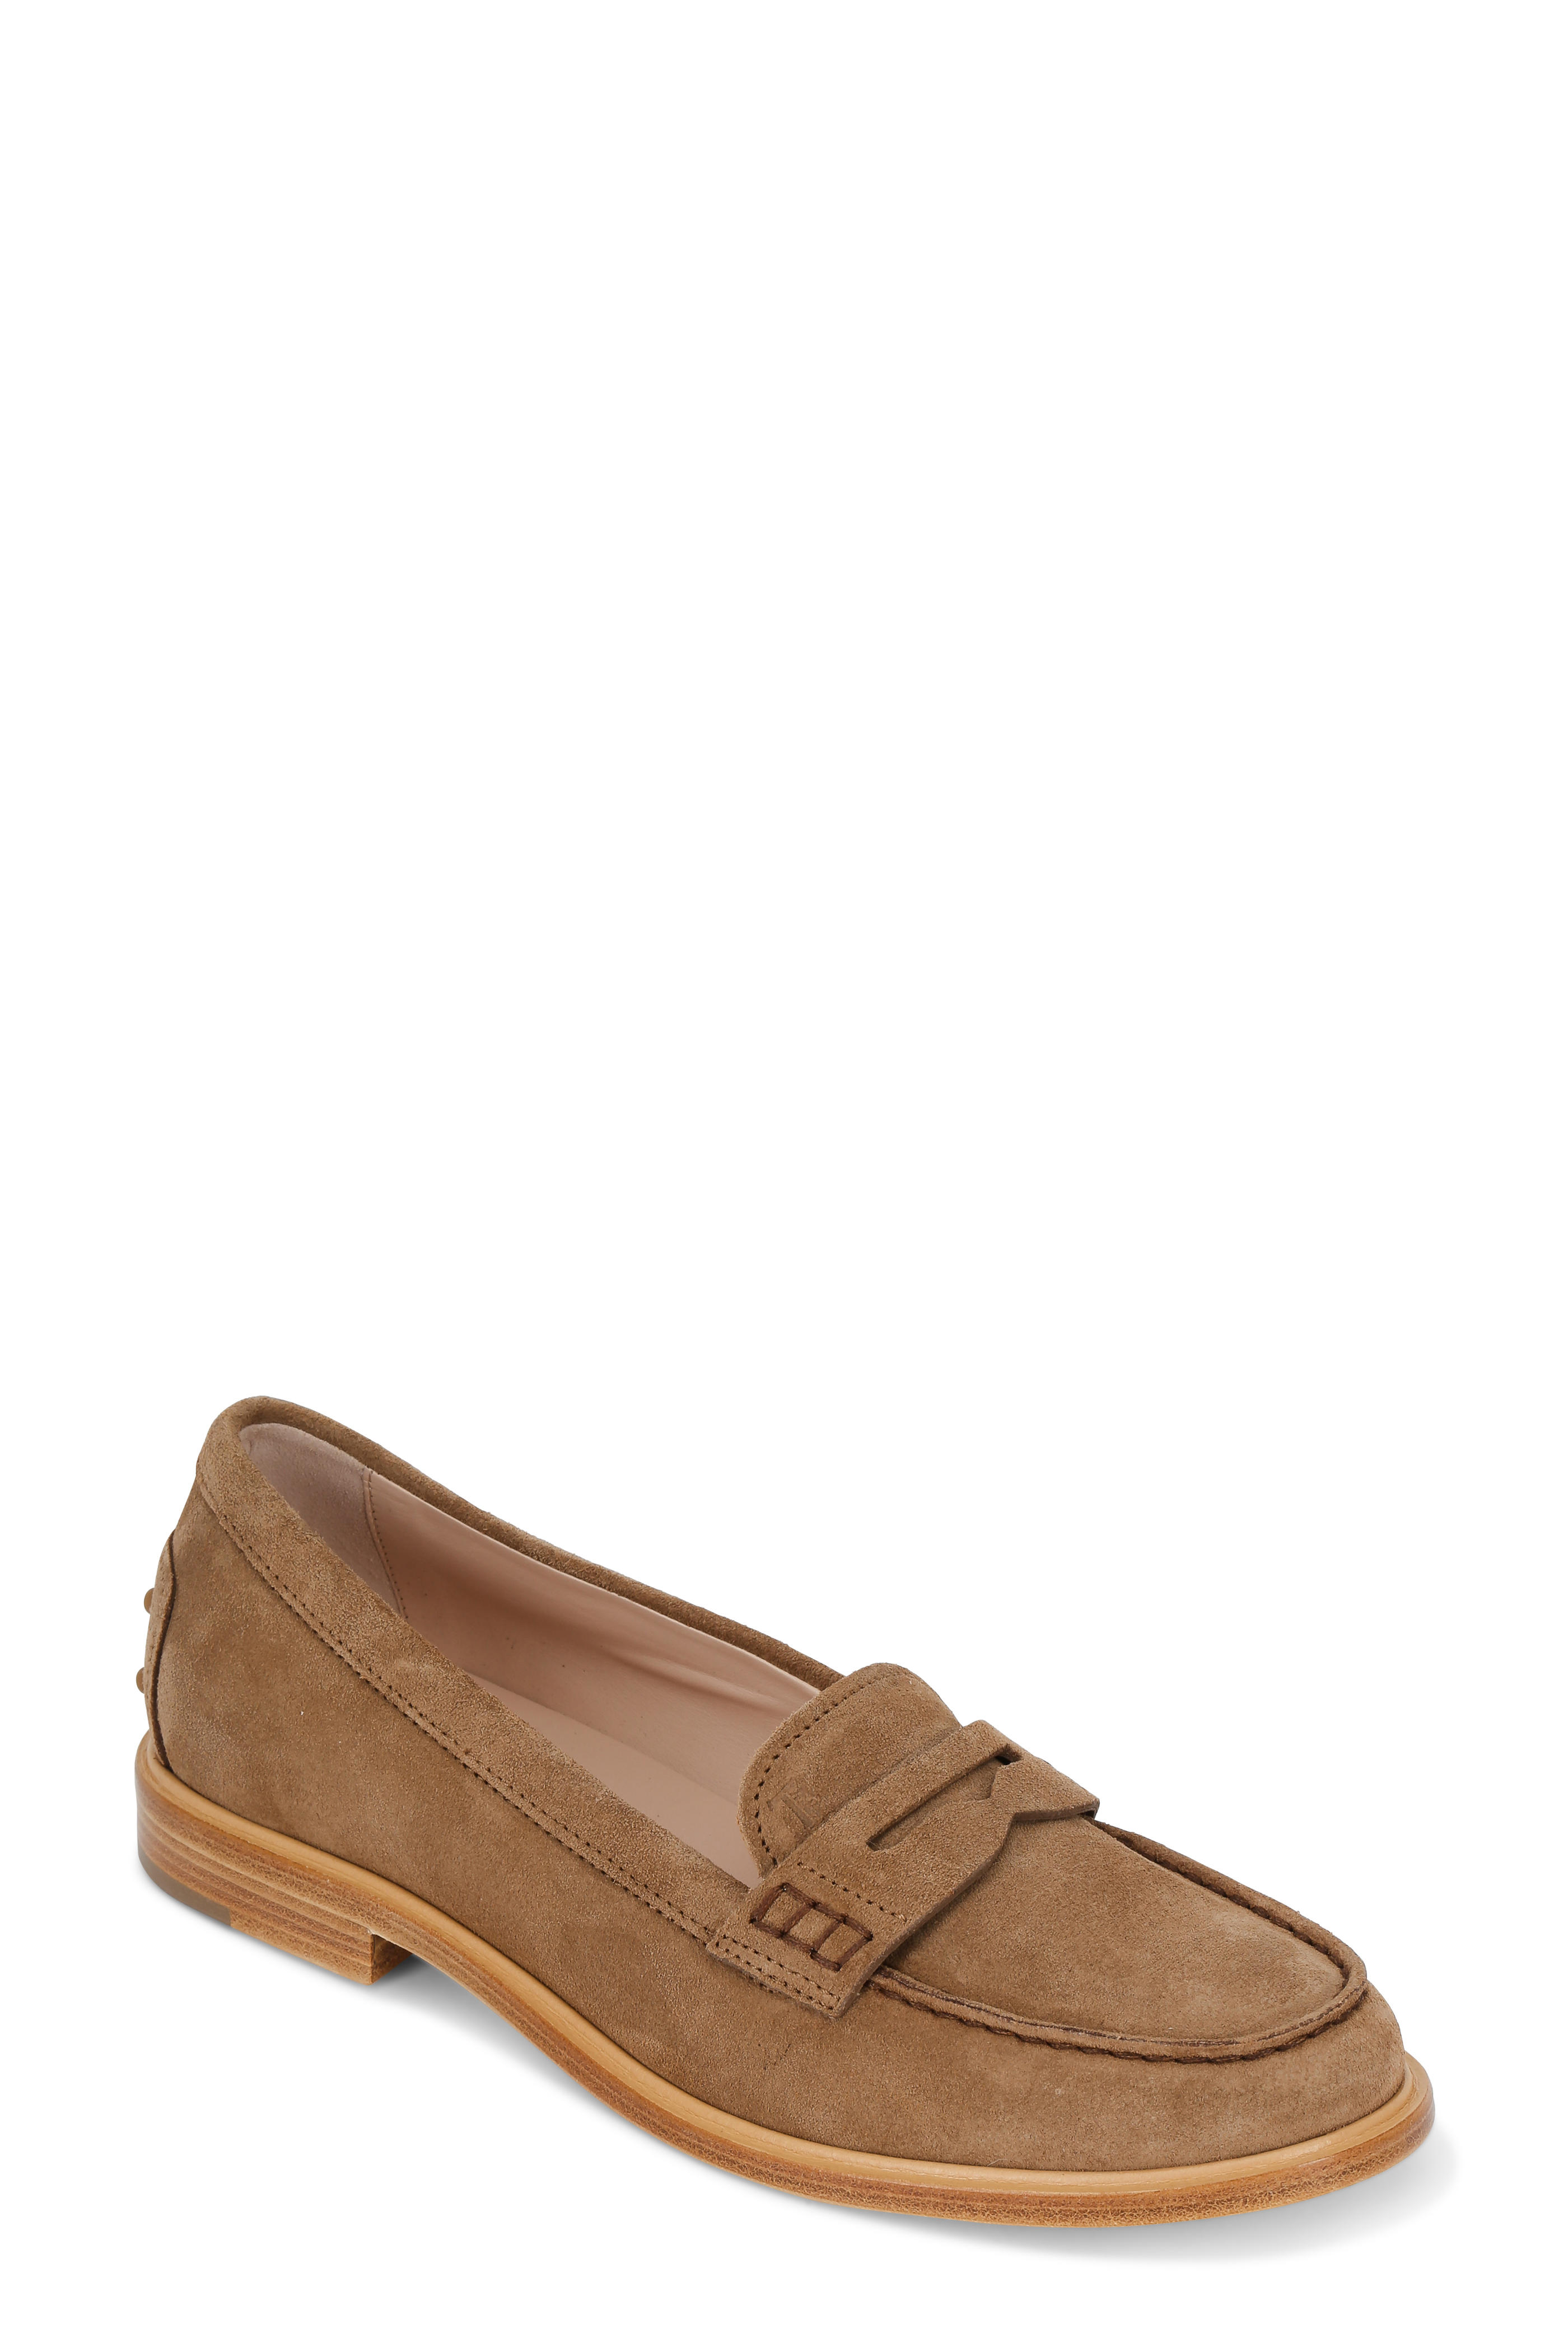 Tod's - Tan Suede Penny Loafer | Mitchell Stores